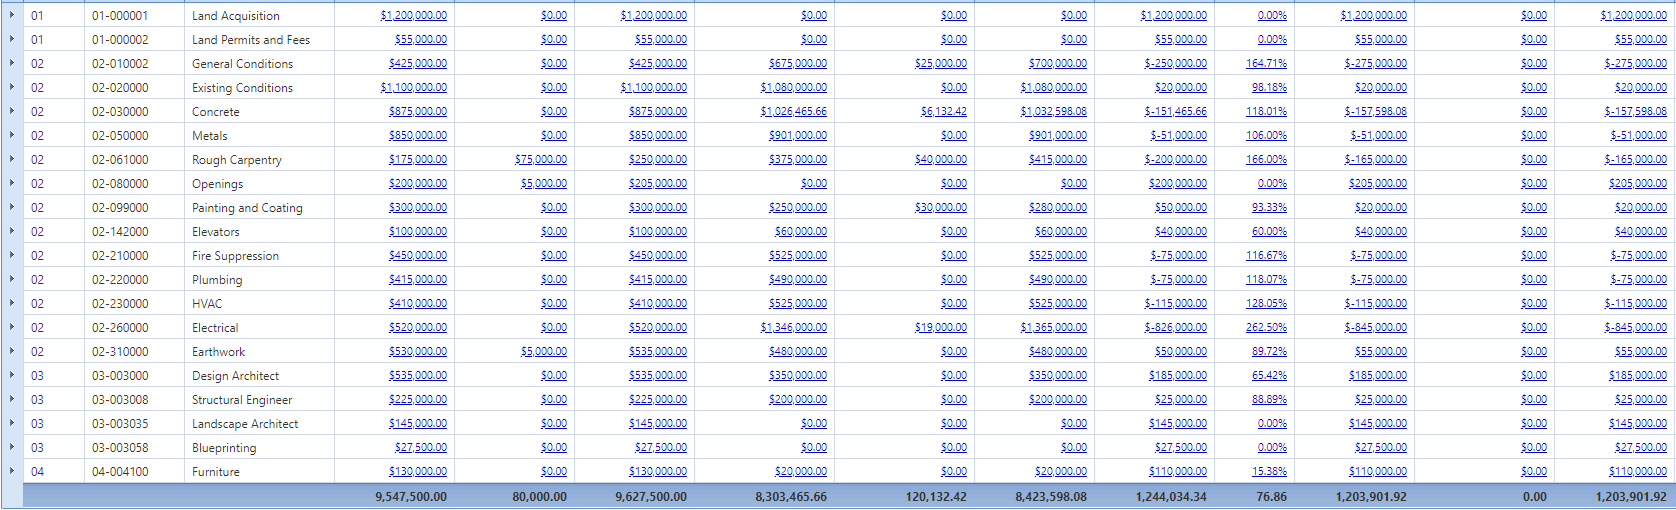 5. Cost Worksheets Details Tab Table